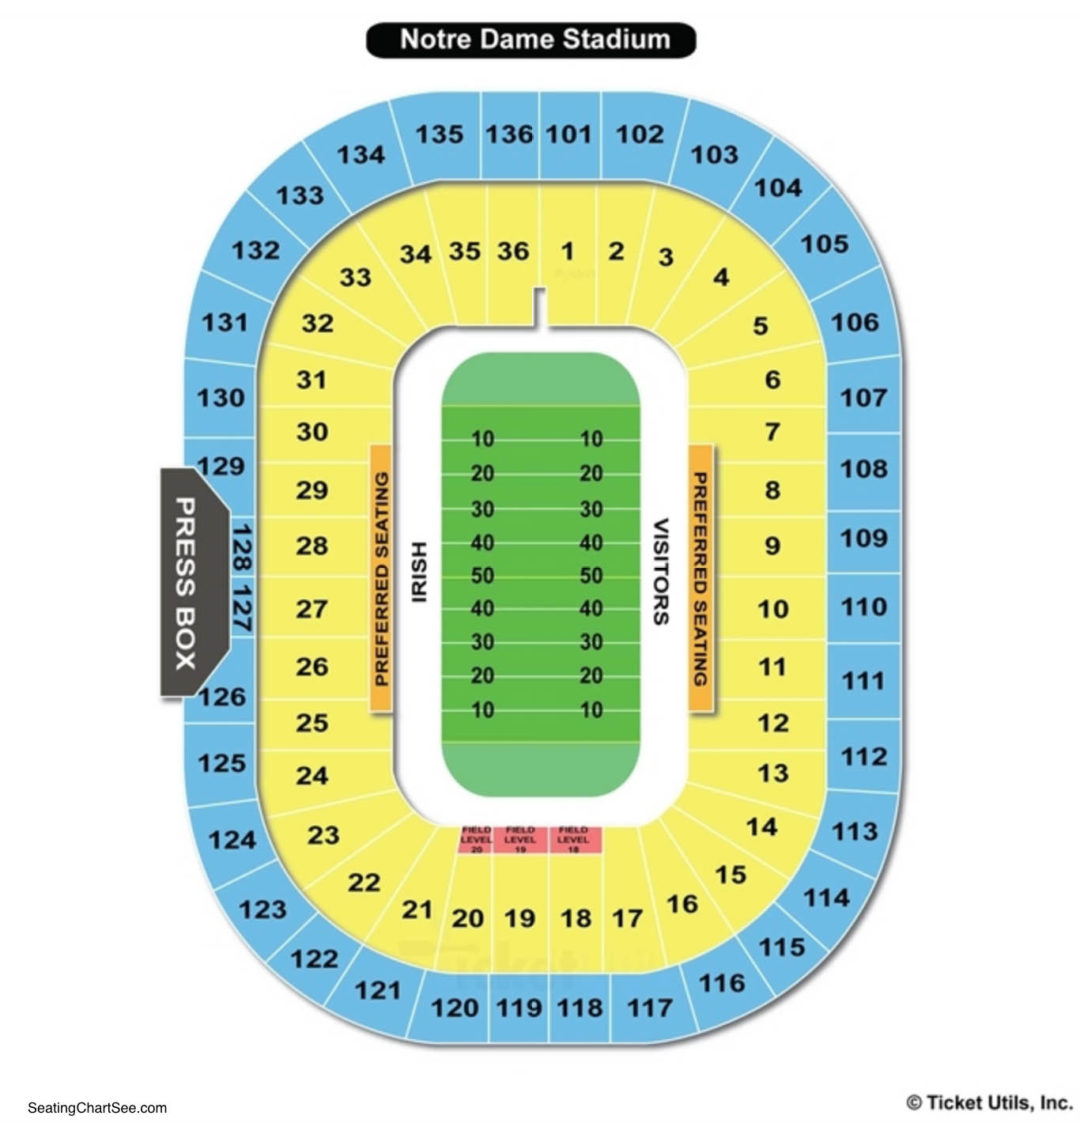 Notre Dame Stadium Seating Chart | Seating Charts &amp; Tickets